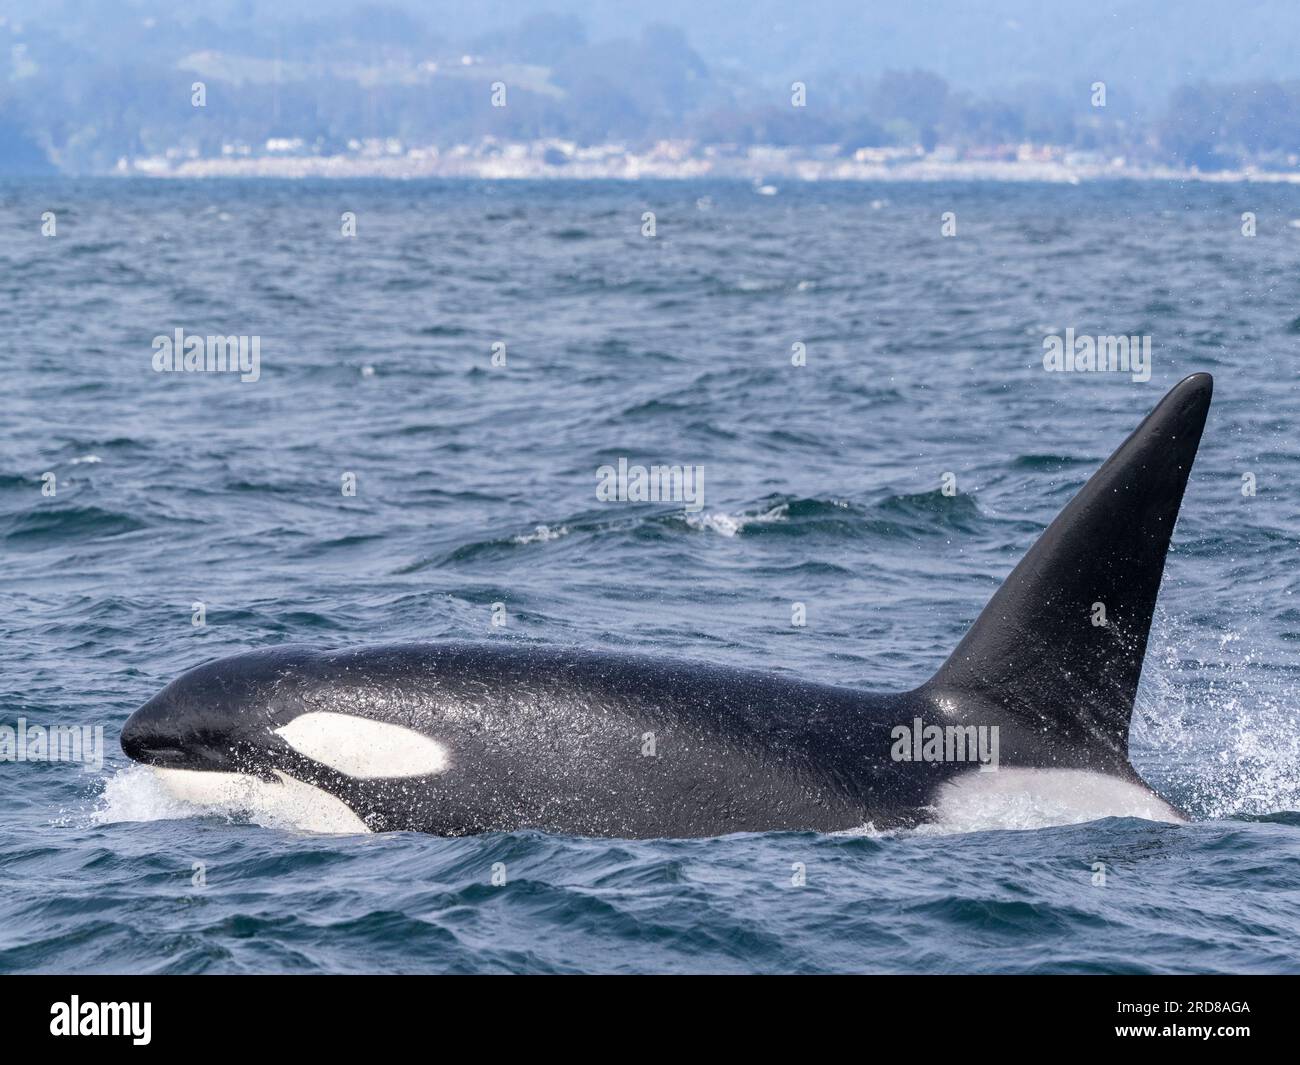 Transient male killer whale (Orcinus orca), surfacing in Monterey Bay Marine Sanctuary, Monterey, California, United States of America, North America Stock Photo